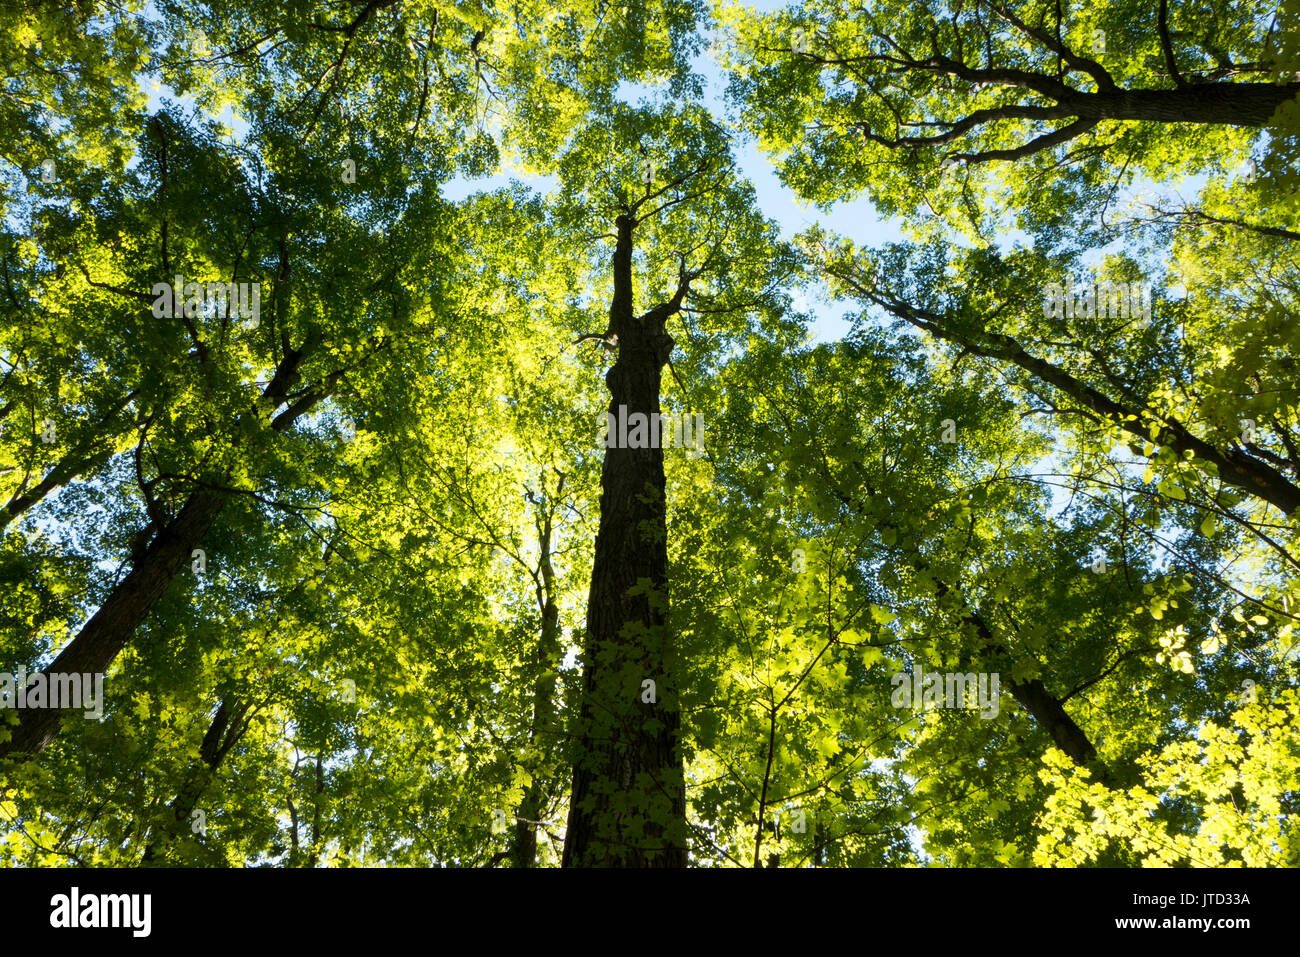 Tall trees reaching for the sky Stock Photo